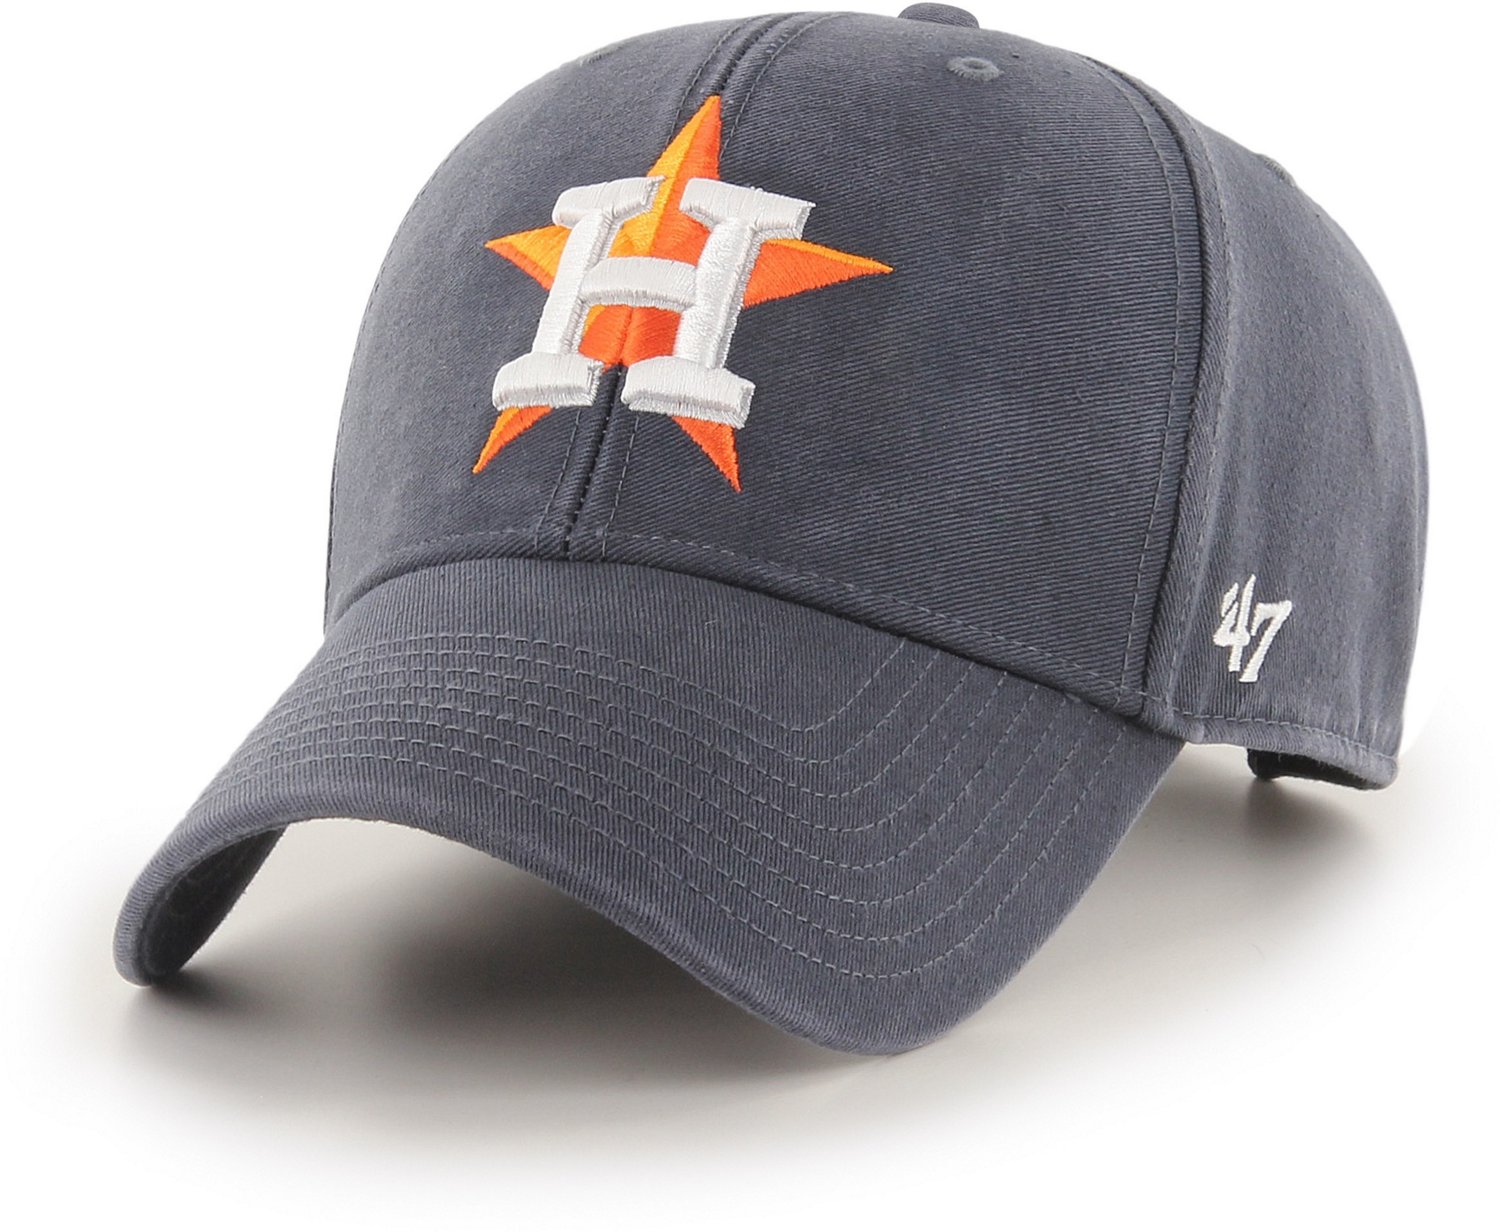 '47 Houston Astros Legend MVP Cap | Free Shipping at Academy